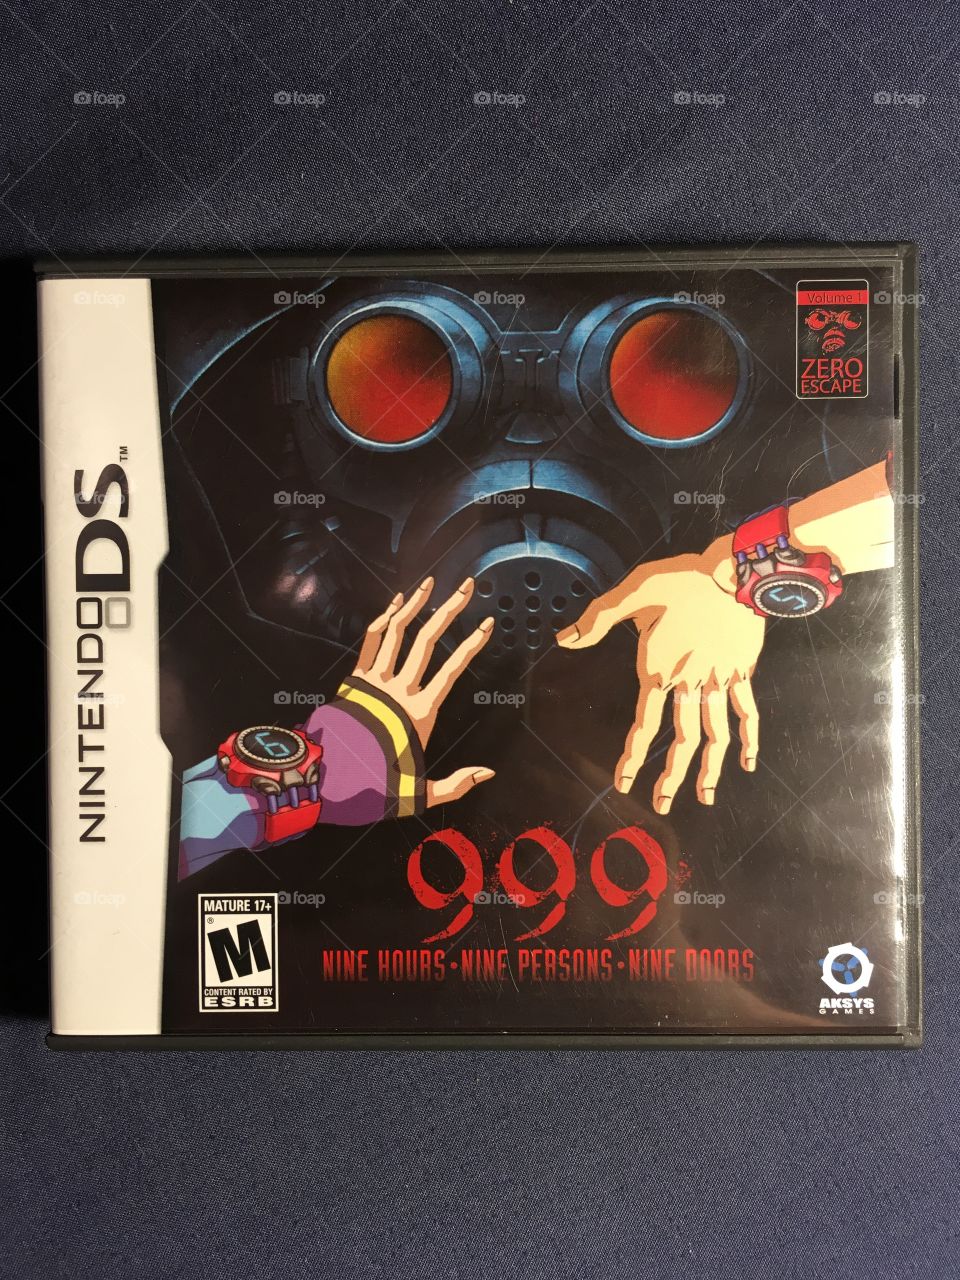 999 video game for the Nintendo DS - released 2010